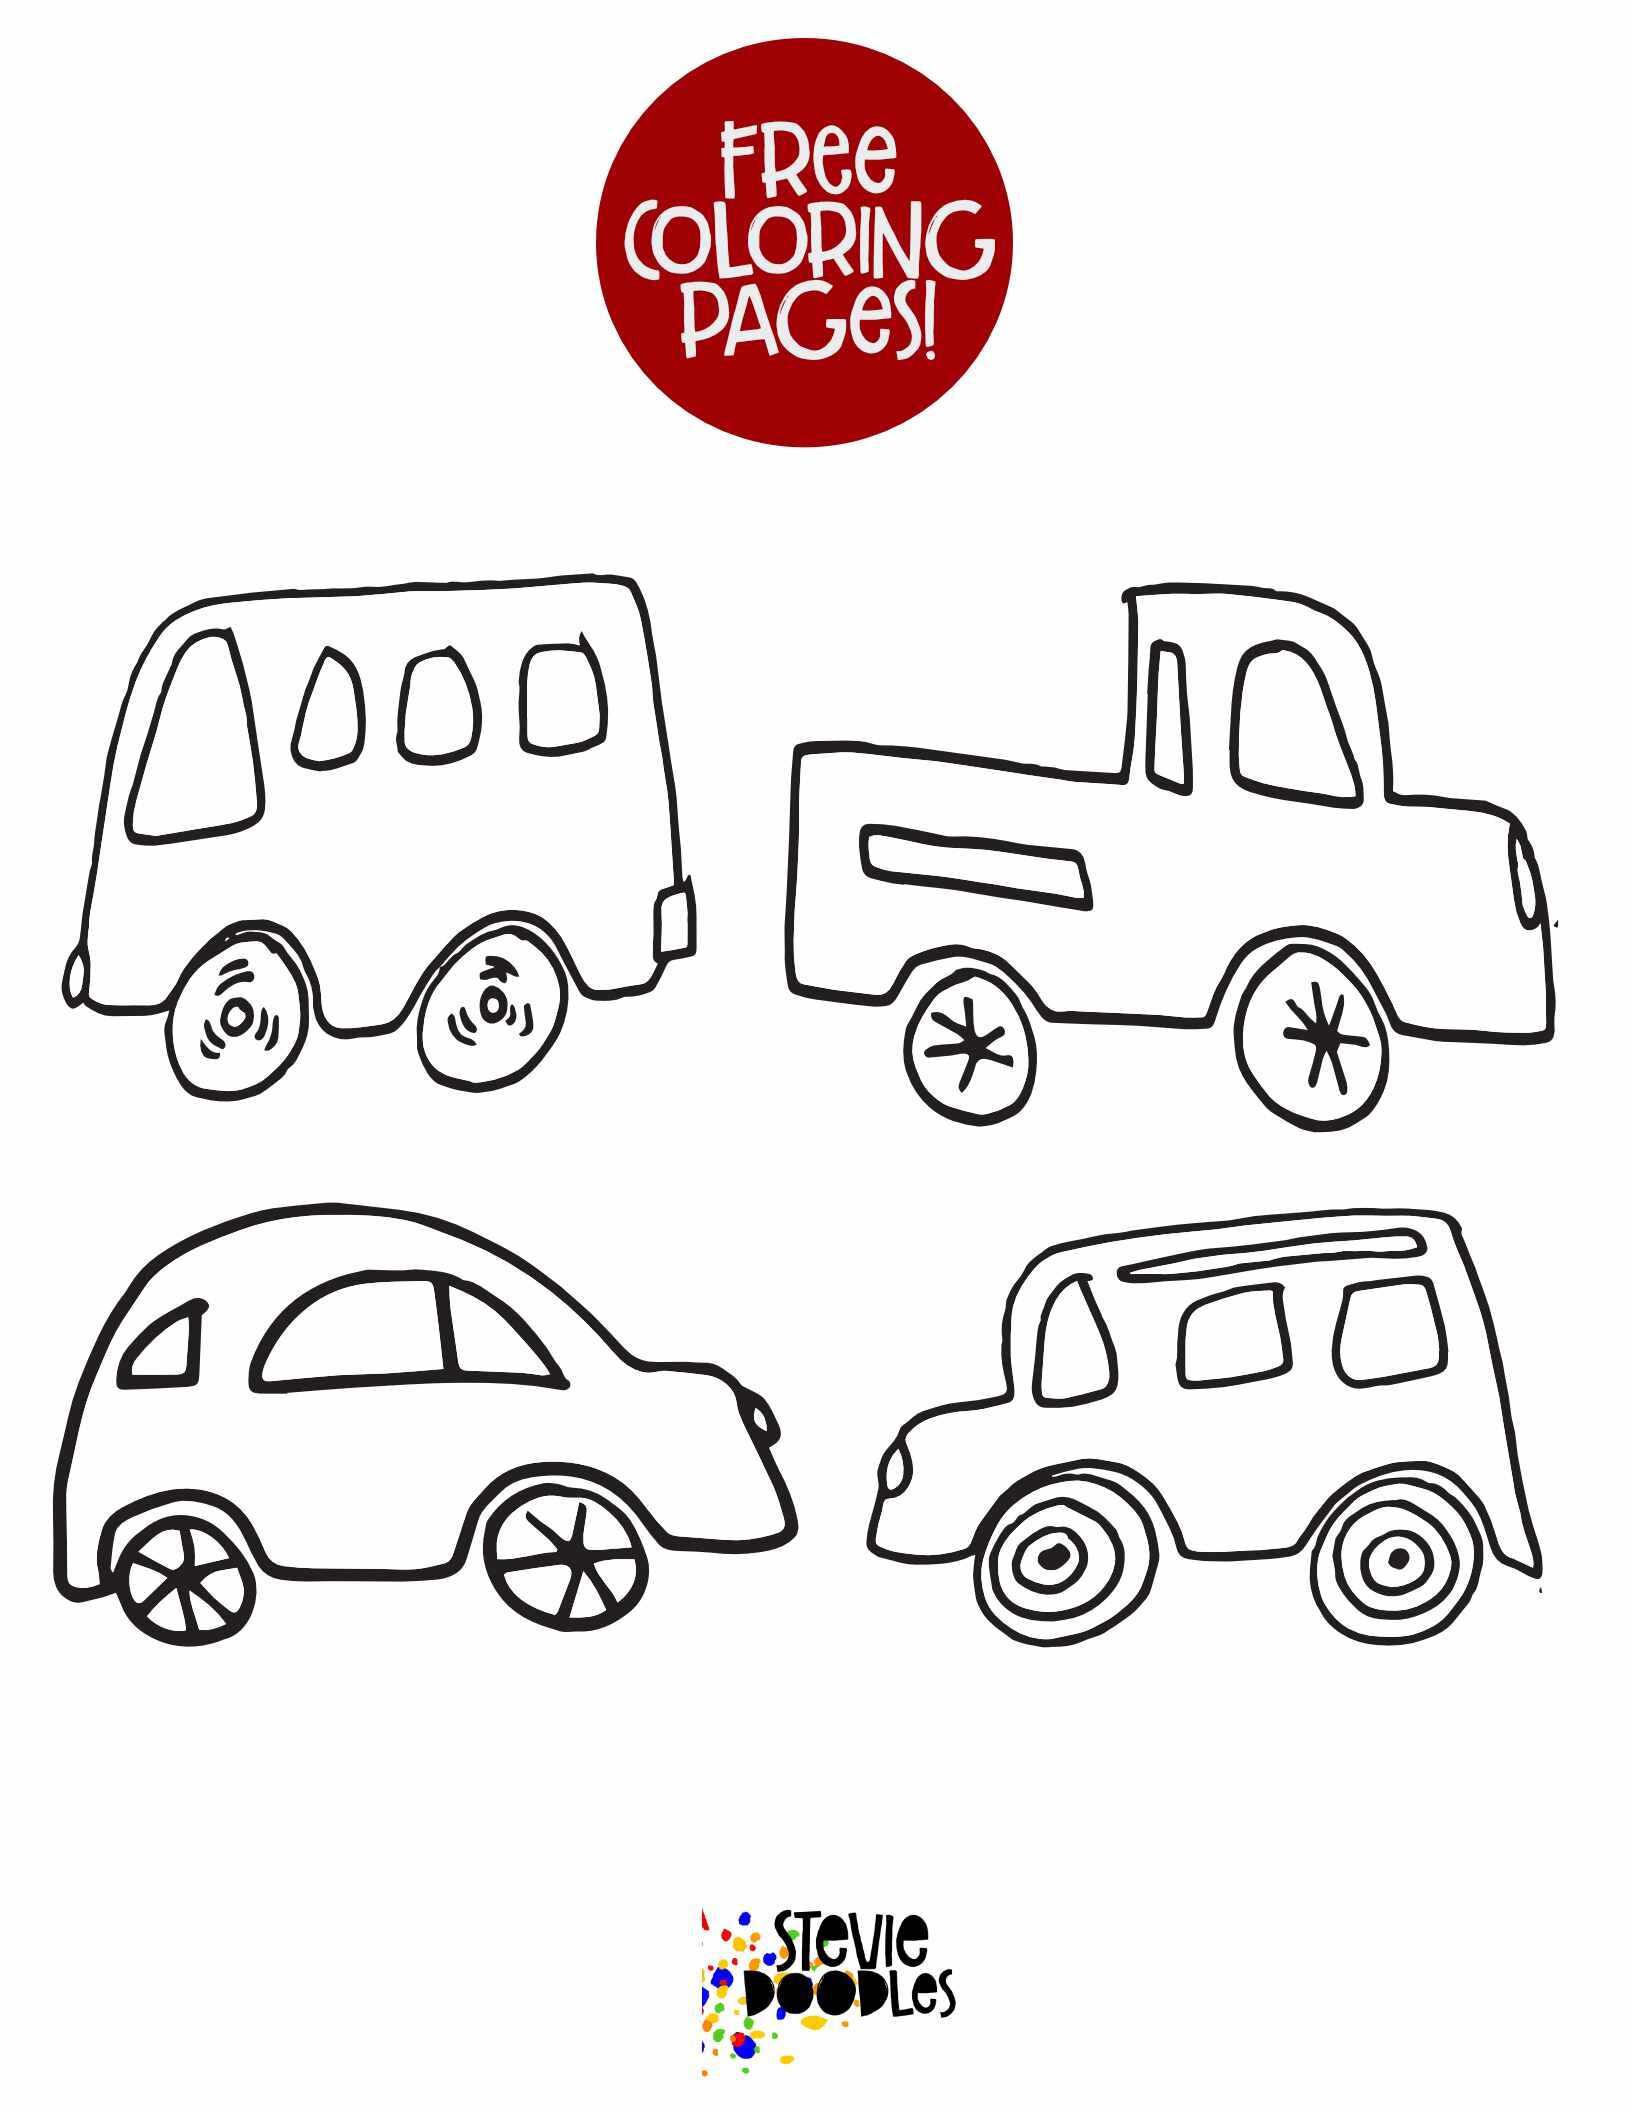 Free Printable Kids Coloring Page! 4 Simple Little Cars!